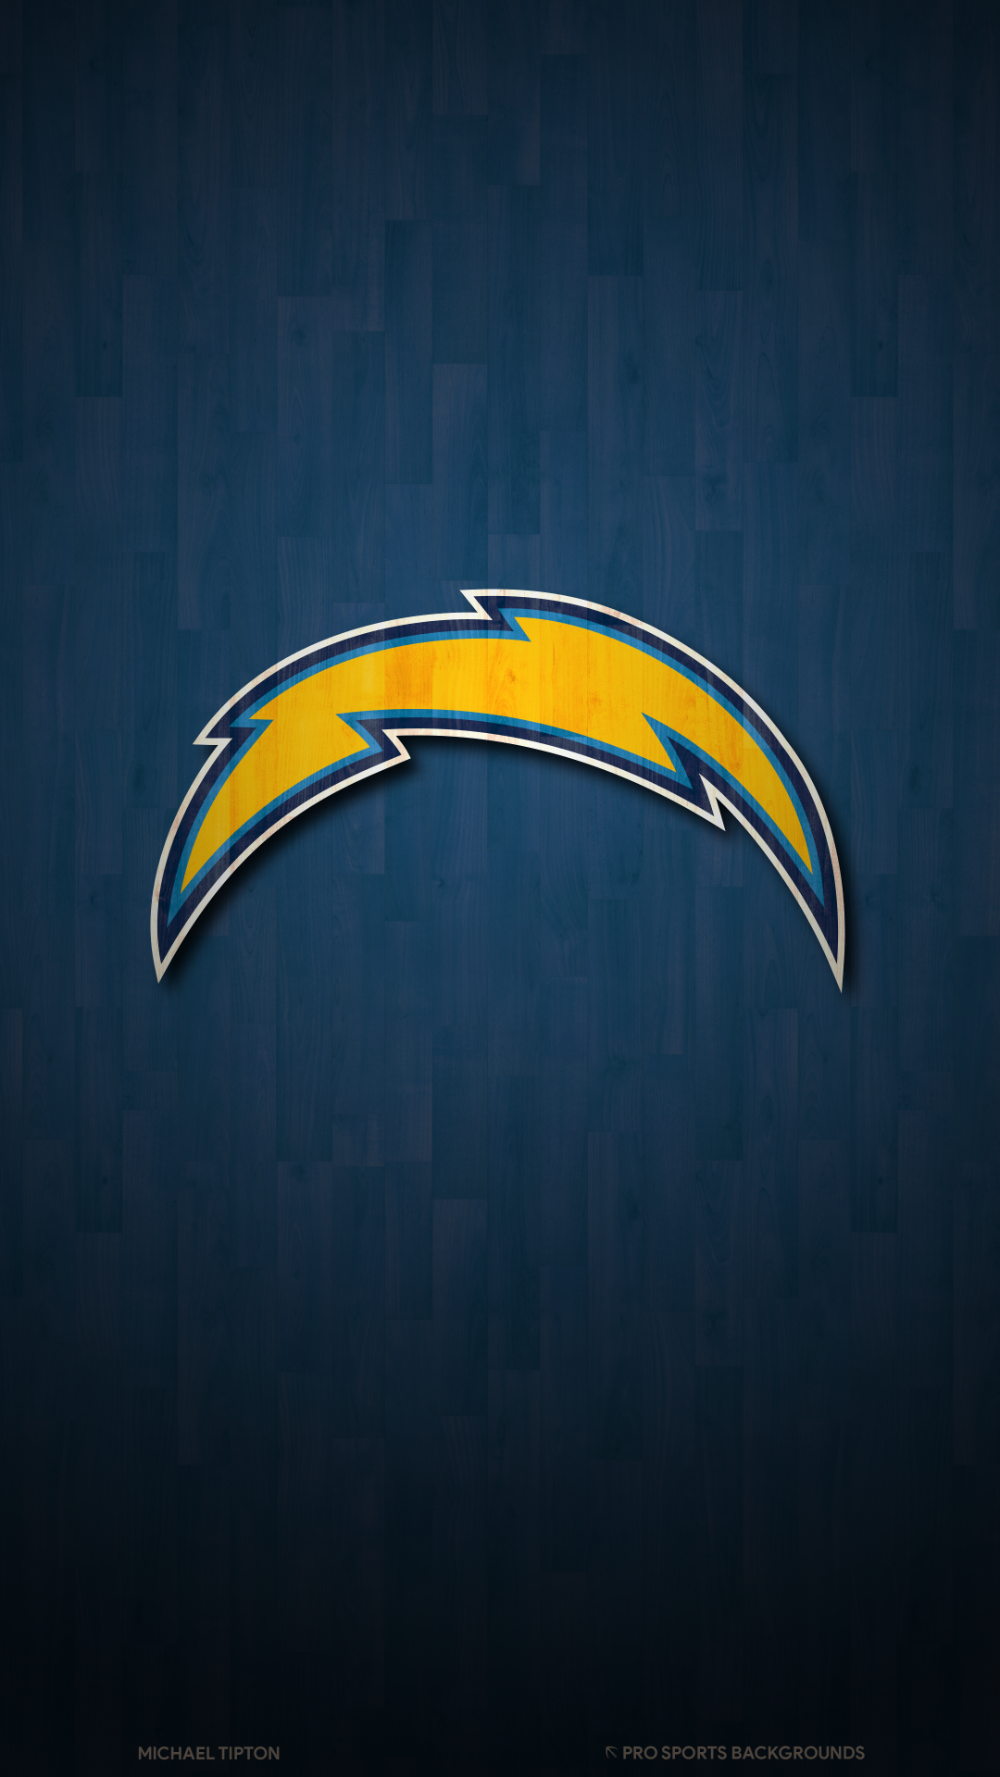 Los Angeles Chargers Wallpaper. Pro Sports Background. Los angeles chargers, Los angeles chargers logo, La chargers logo